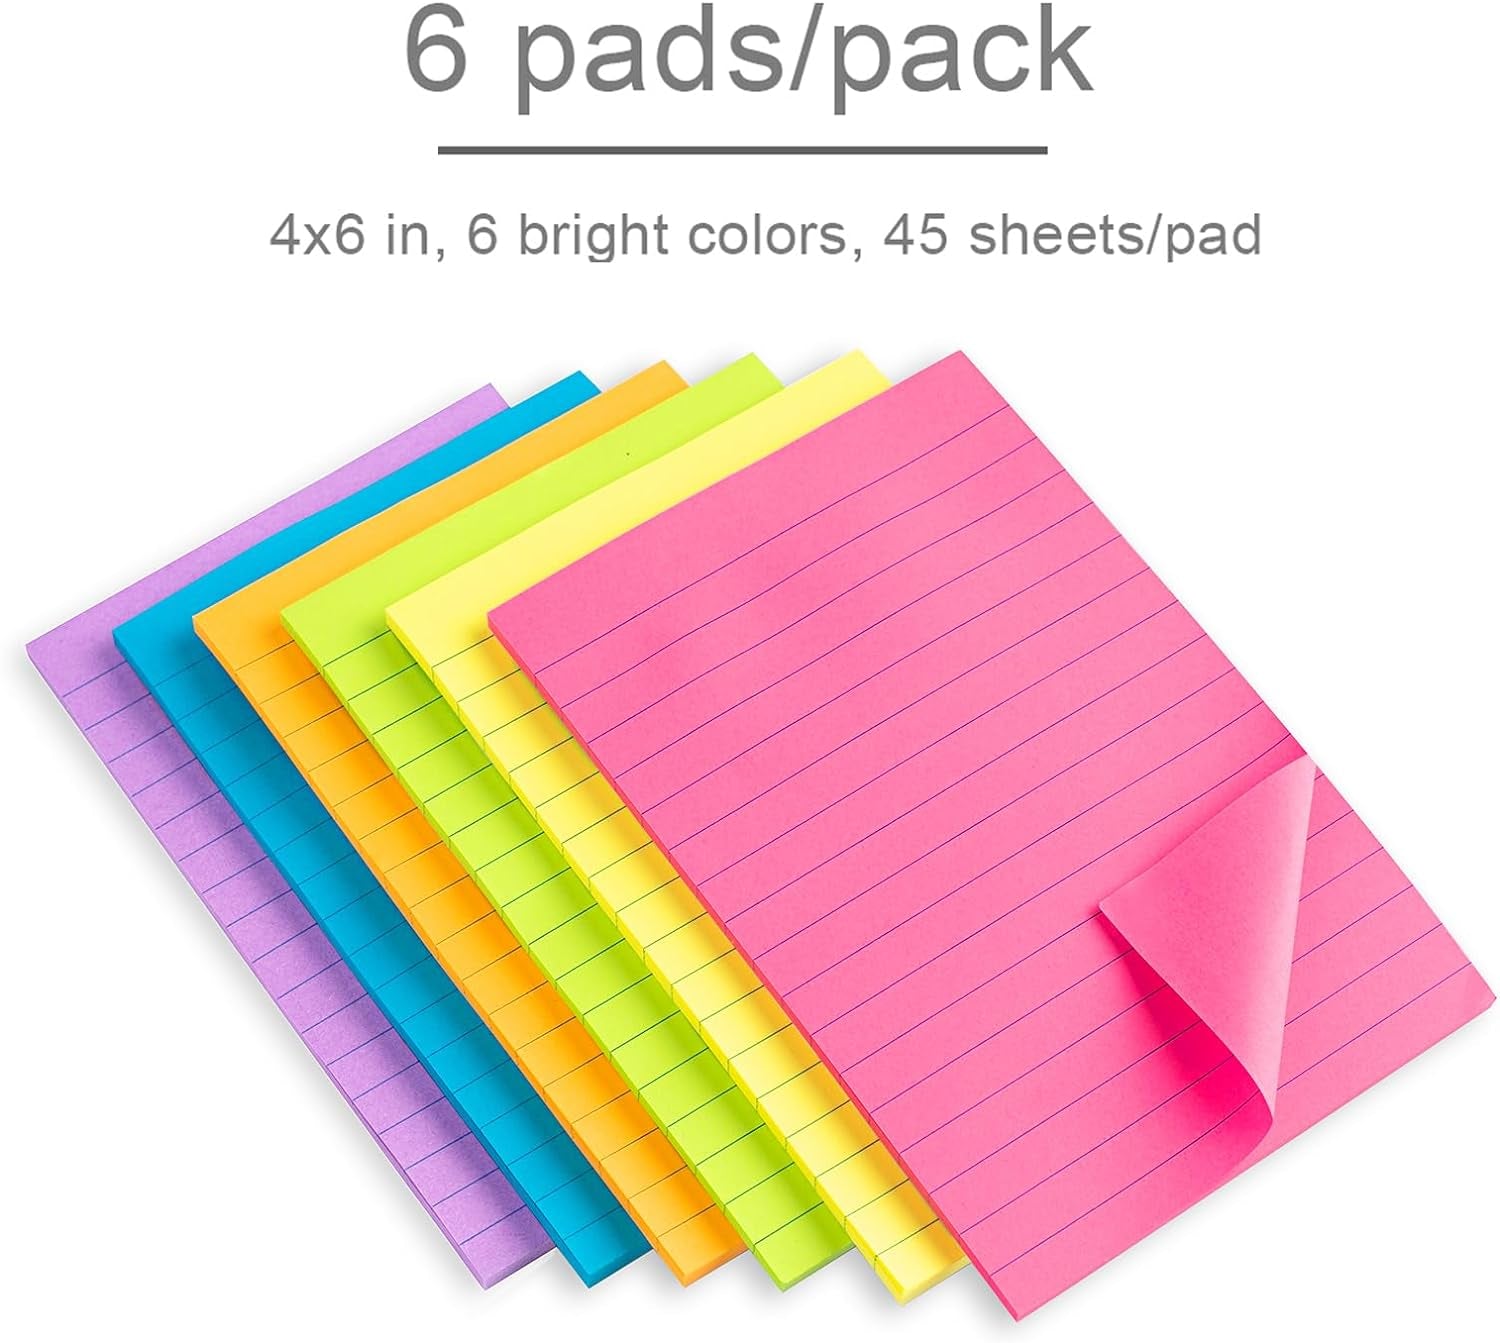 Lined Sticky Notes 4X6 in Bright Ruled Post Stickies Colorful Super Sticking Power Memo Pads, 45 Sheets/Pad, 6 Pads/Pack